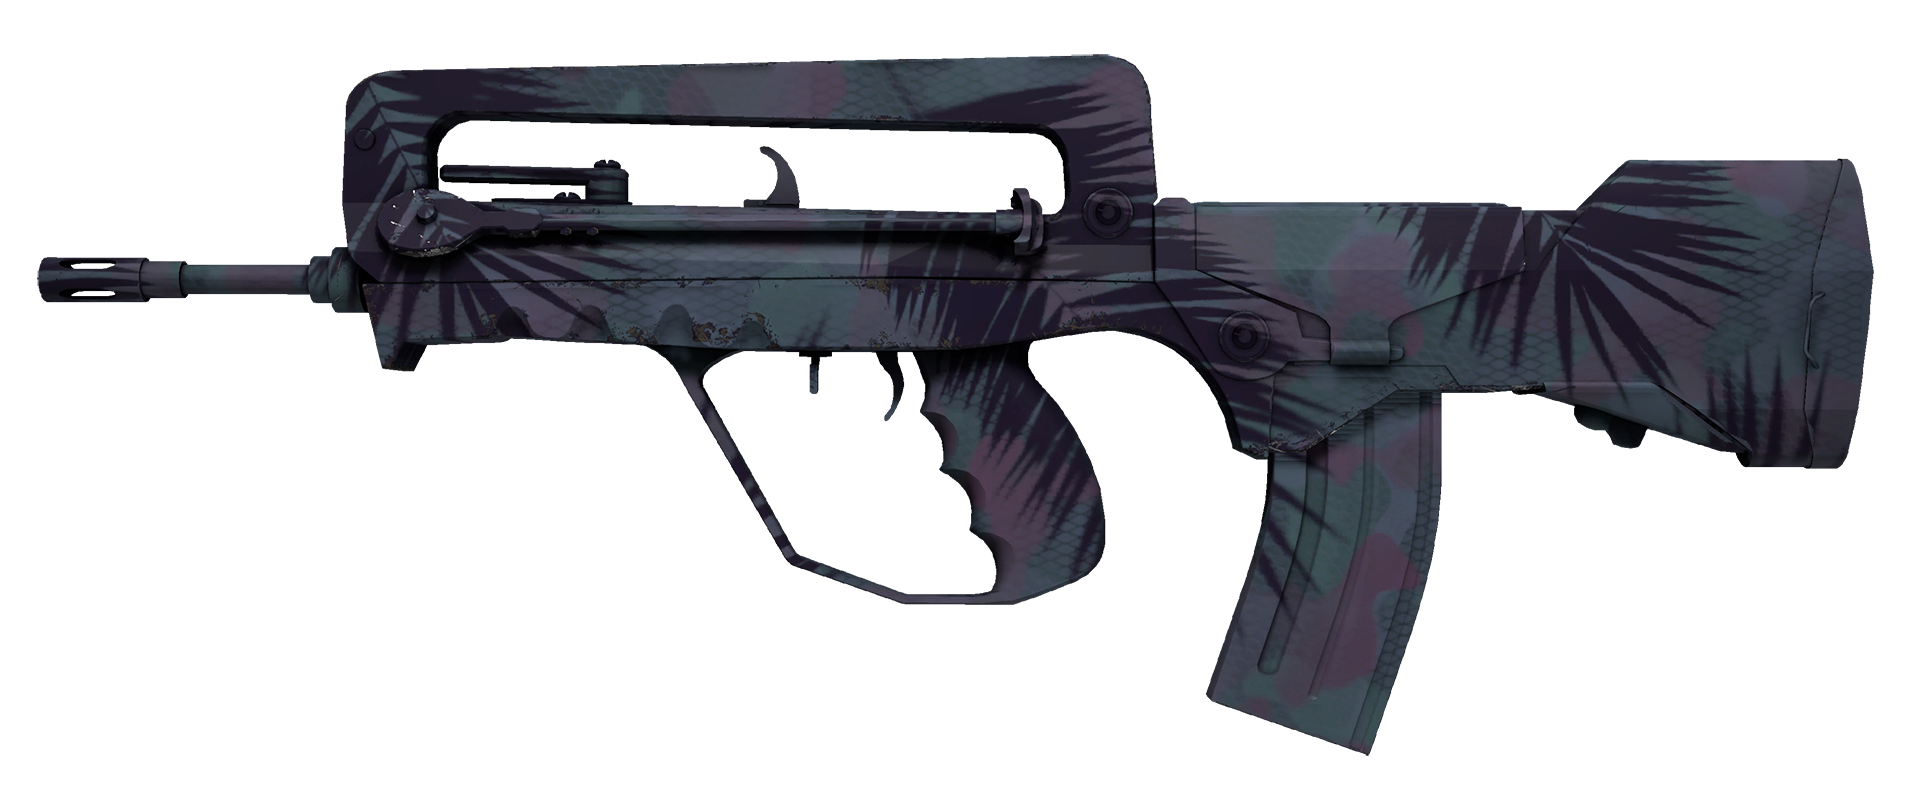 FAMAS Colony cs go skin download the new